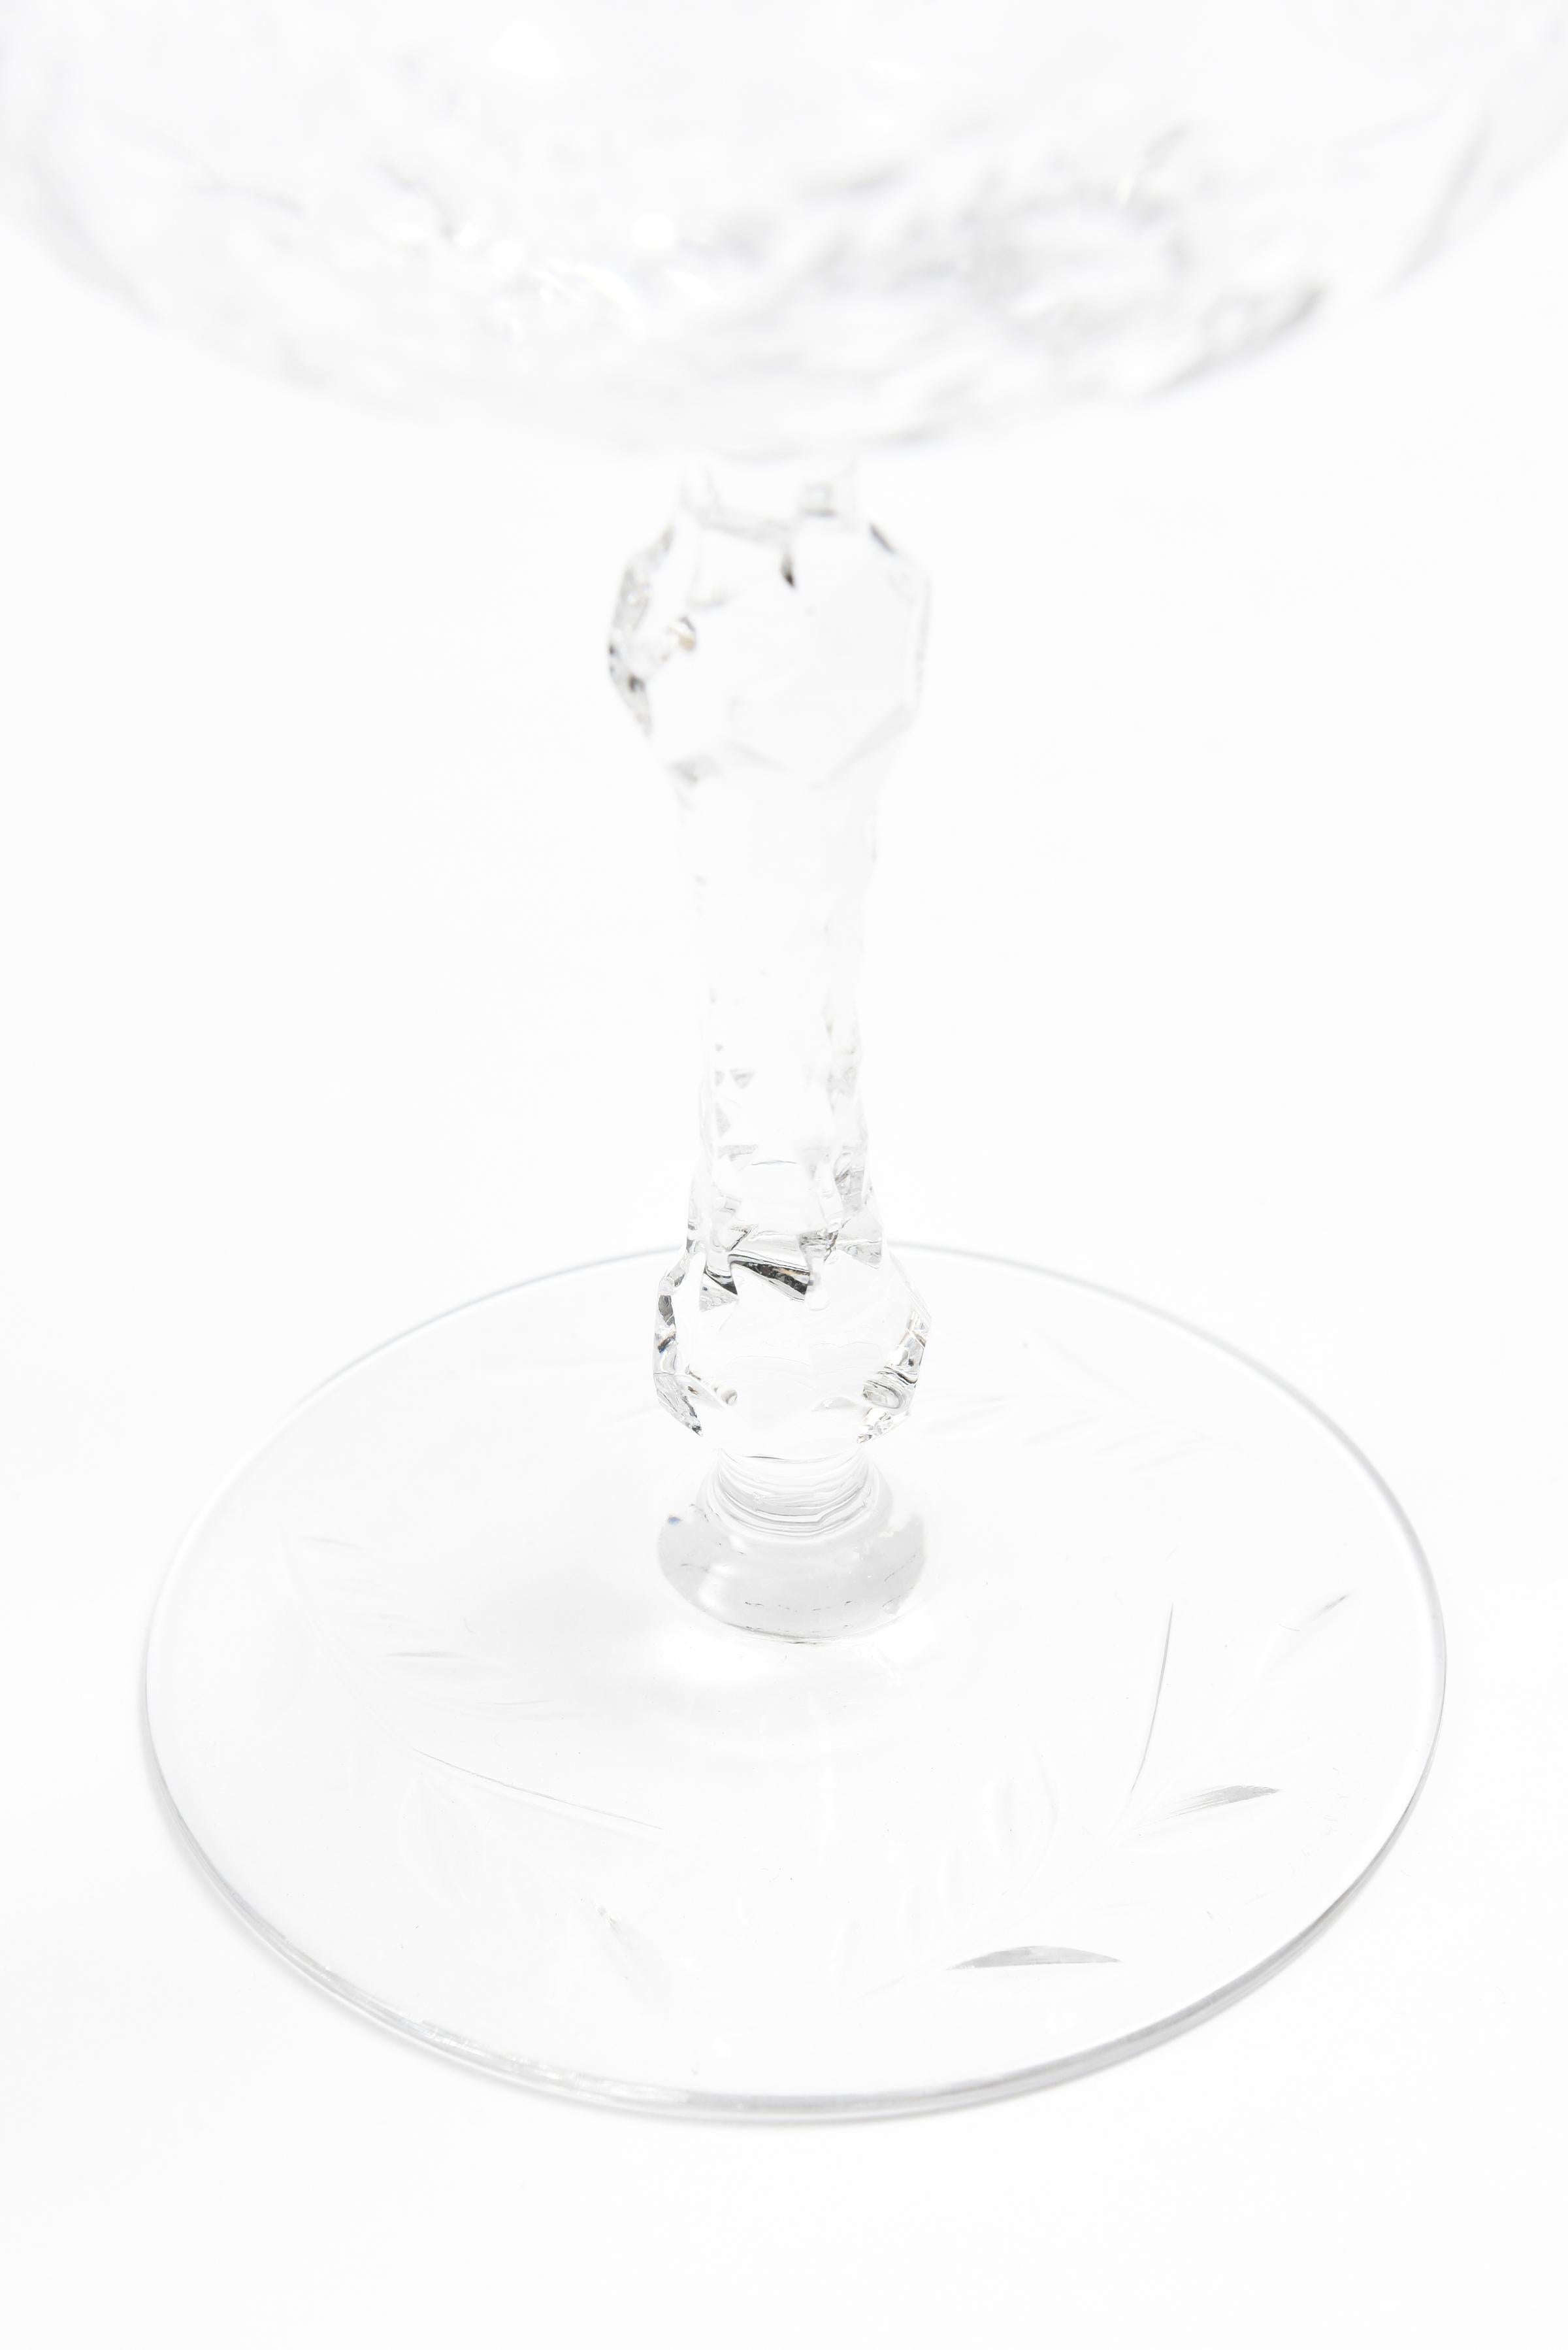 Eleven Champagne Coupes, Antique American with Jewel Knob Stems 2